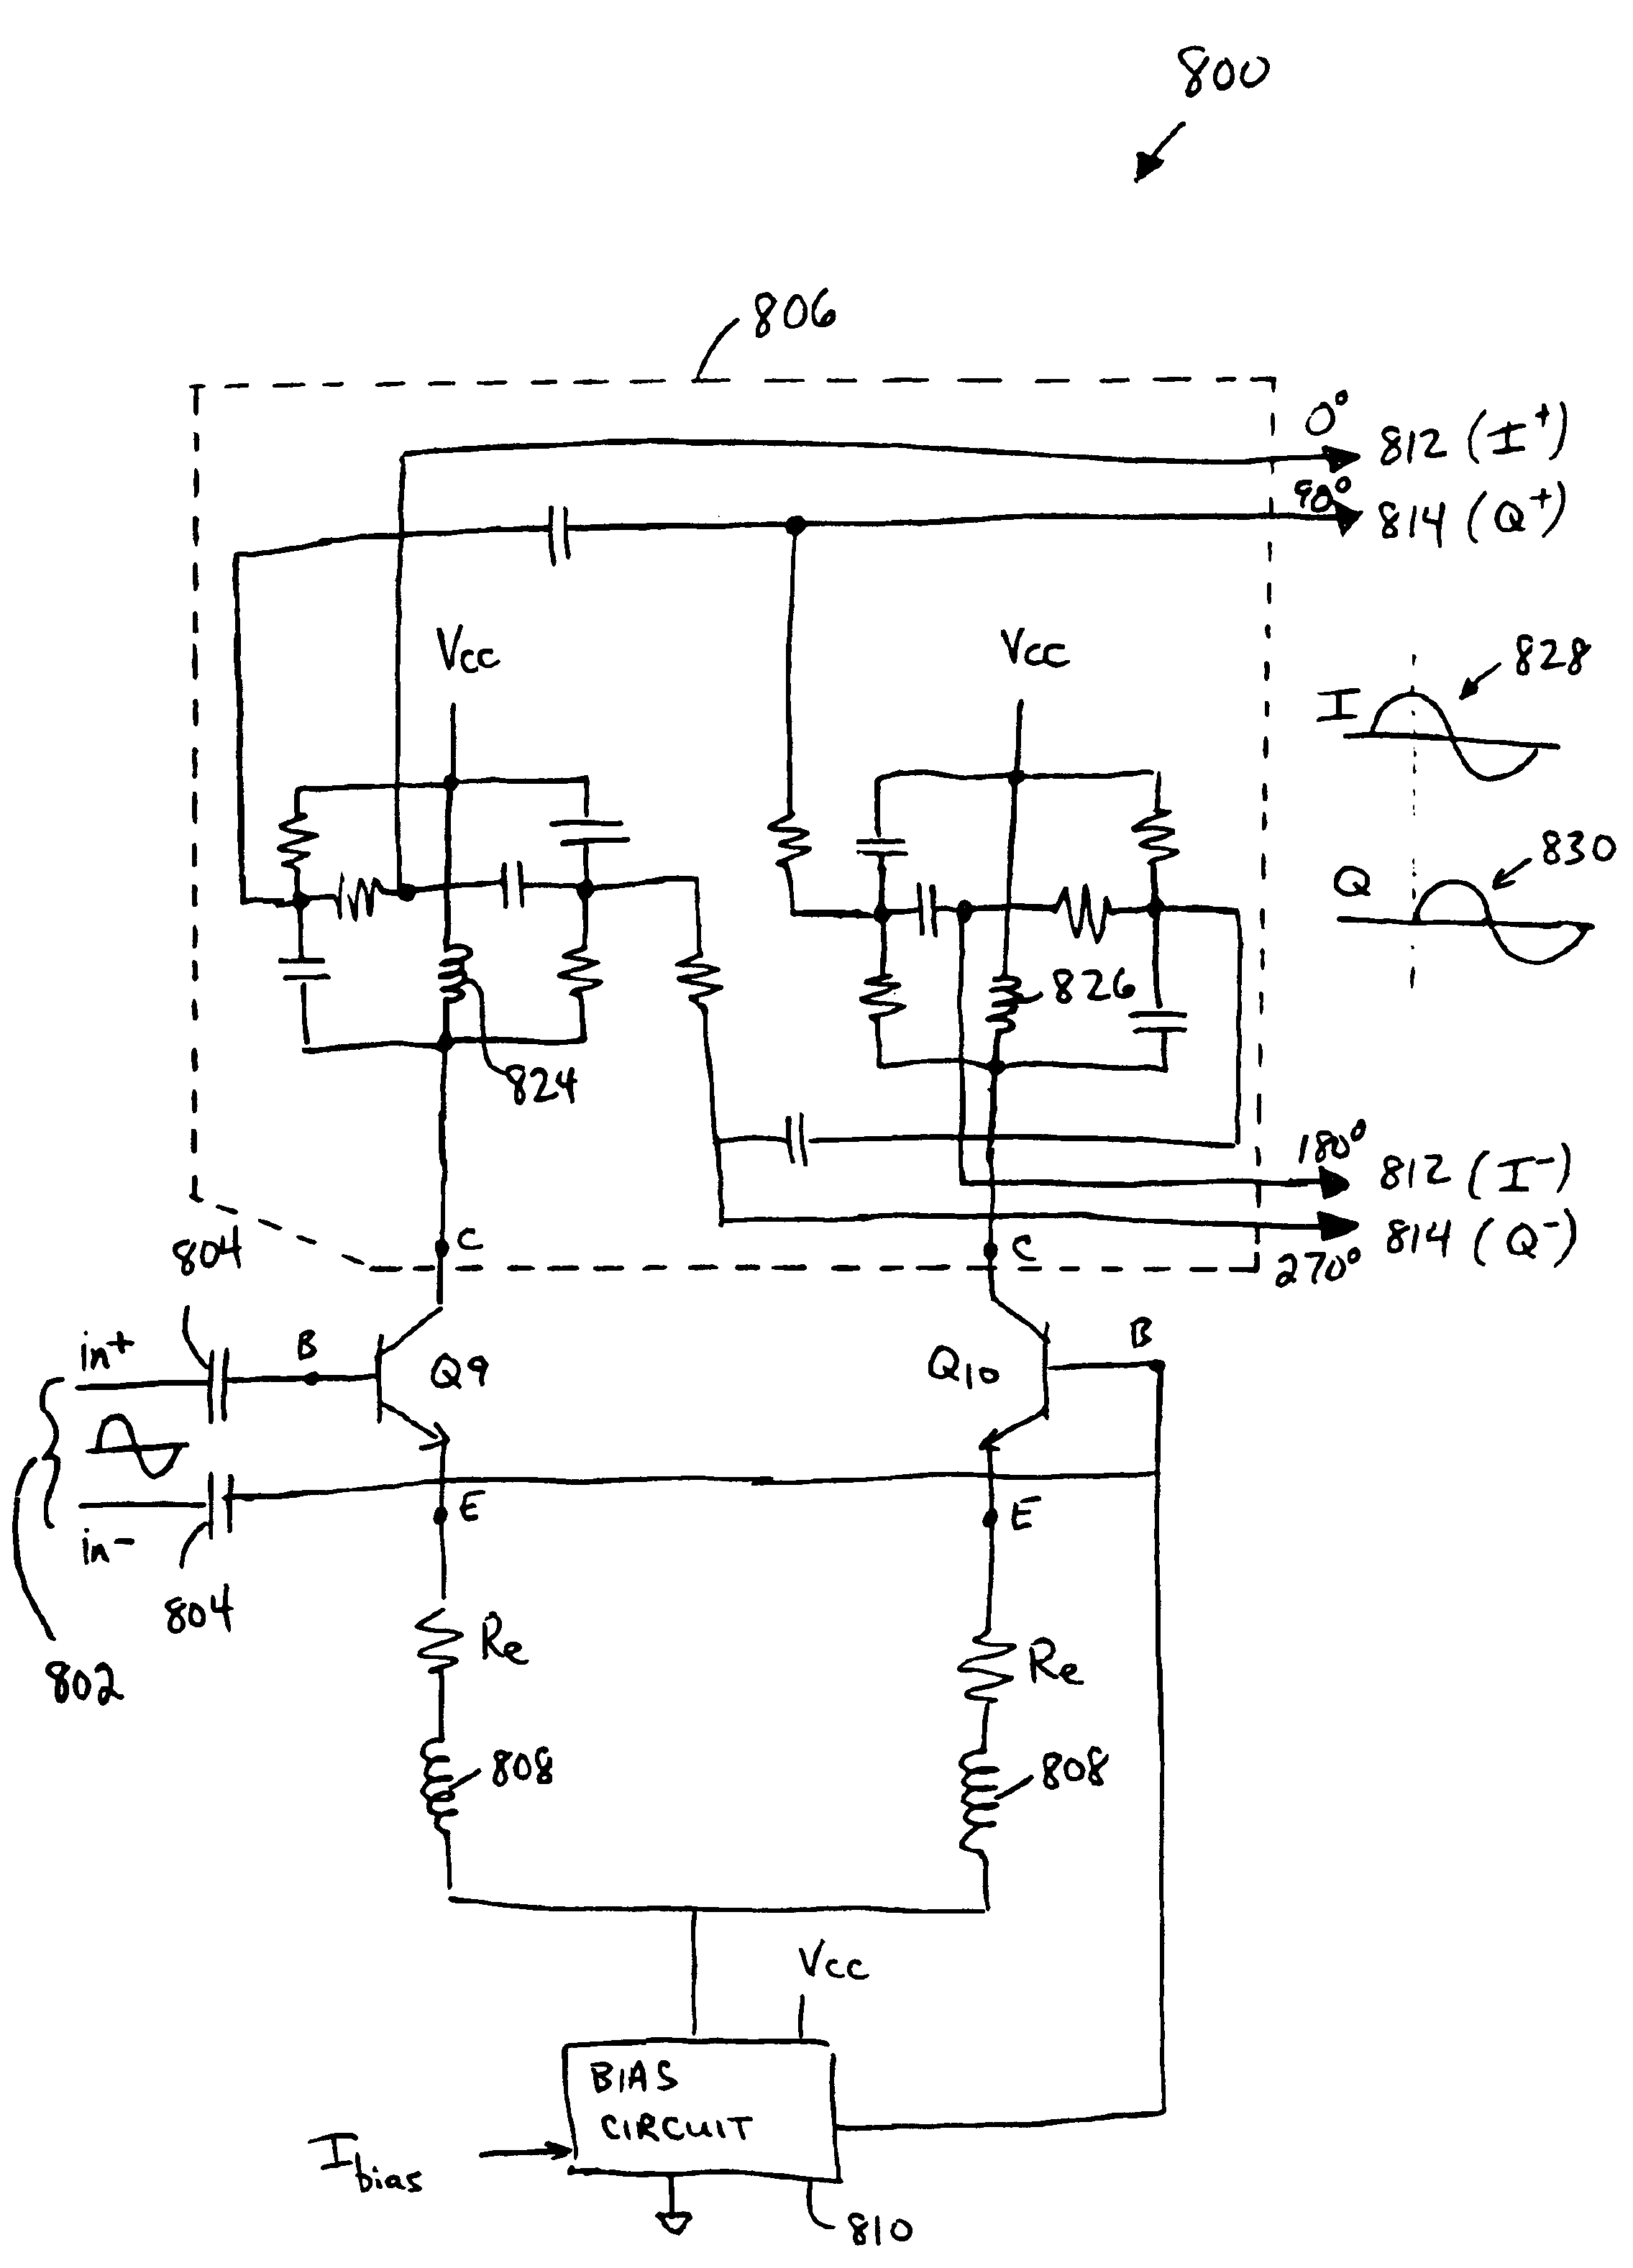 Rectifier type frequency doubler with harmonic cancellation